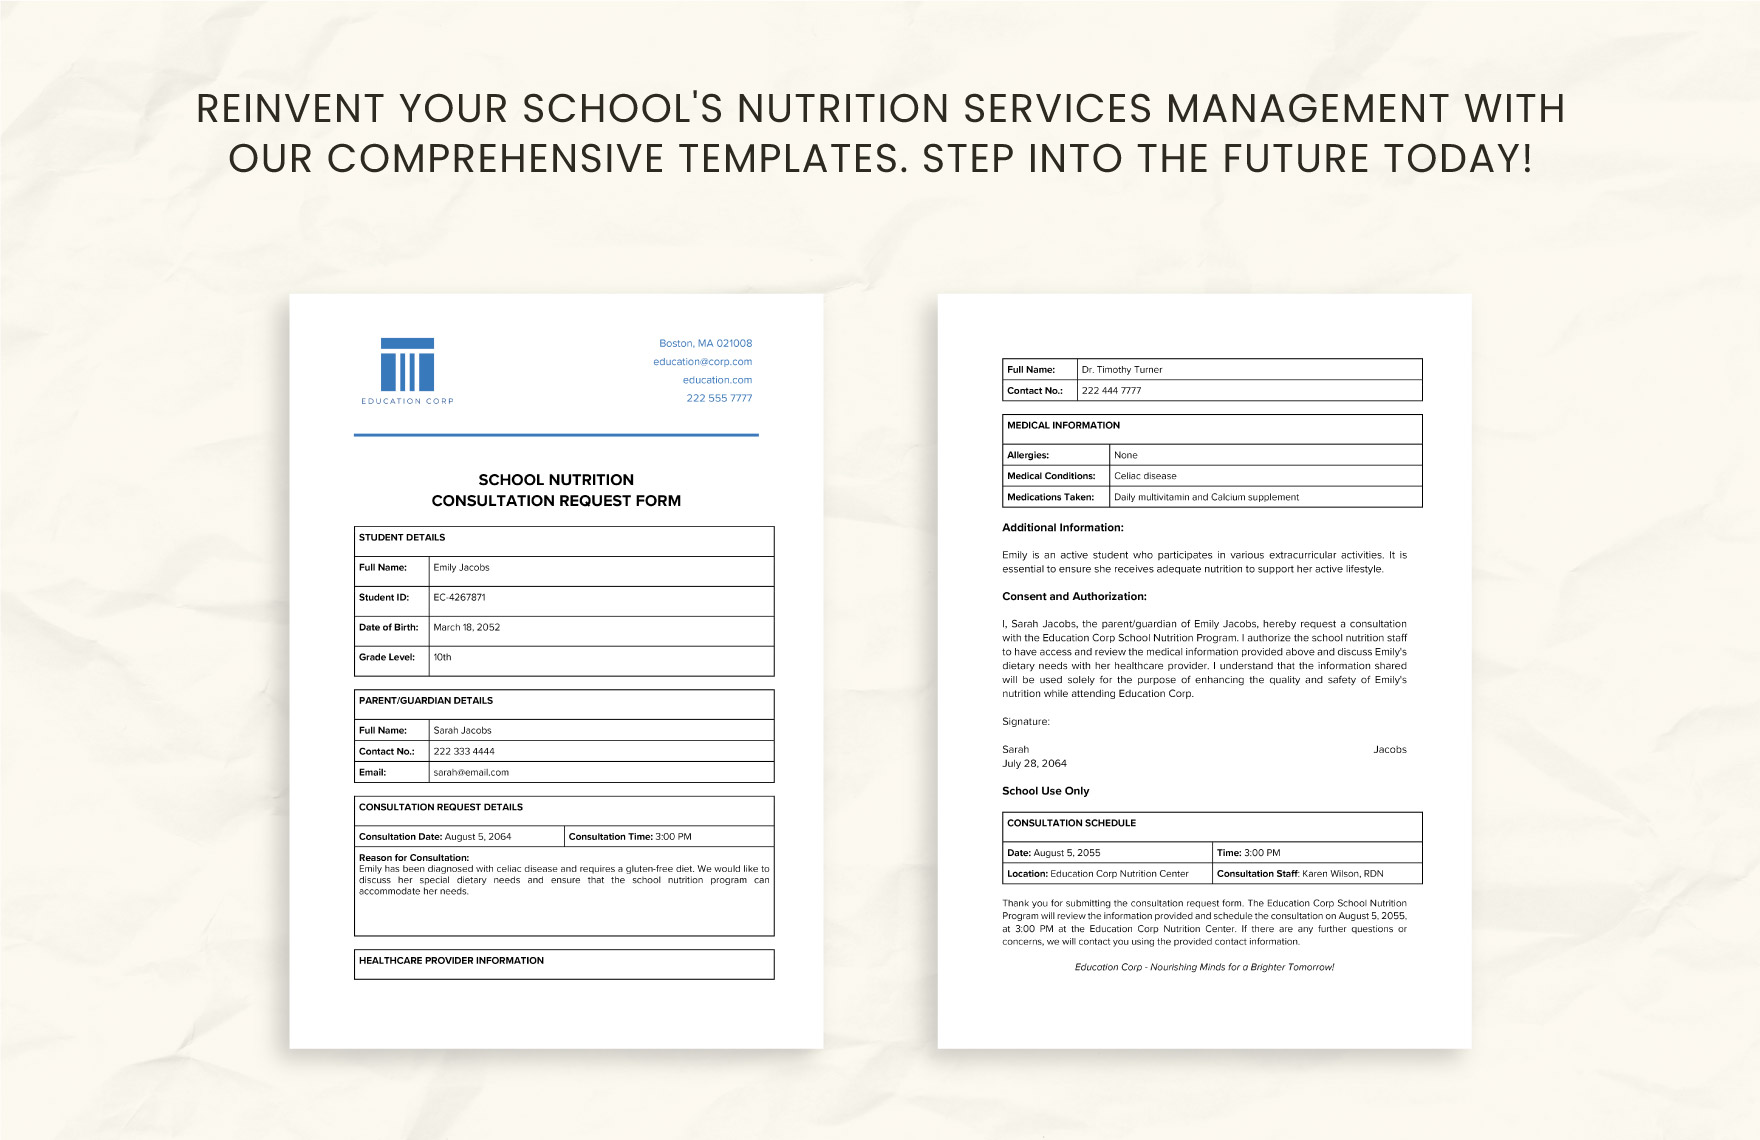 School Nutrition Consultation Request Form Template